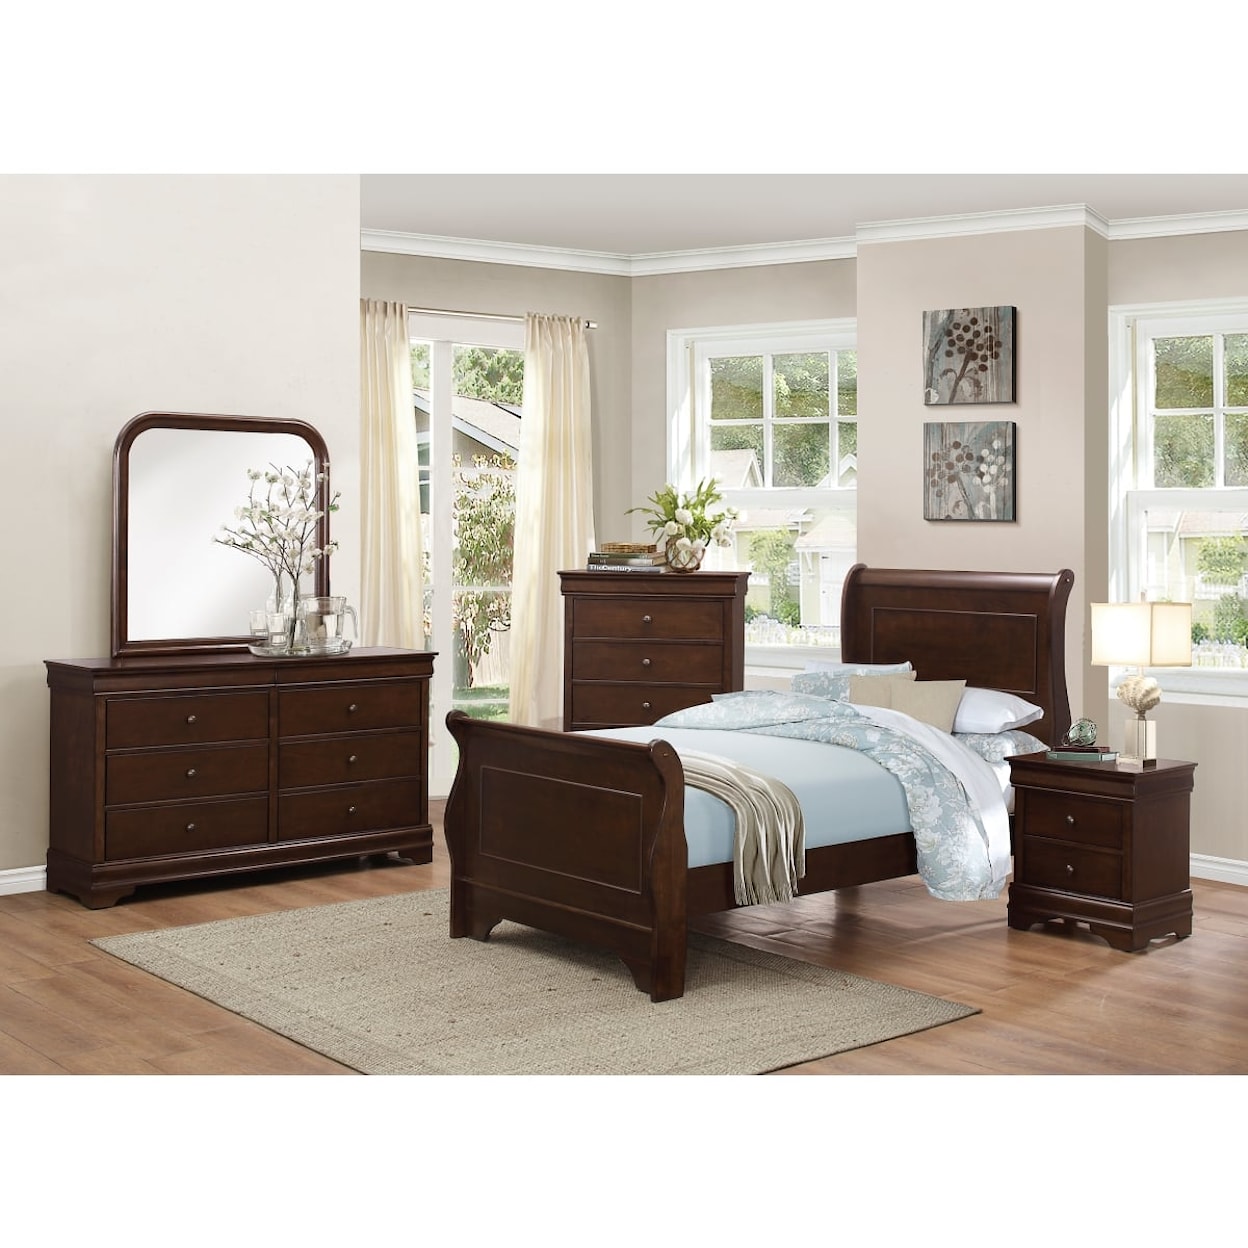 Homelegance Furniture Abbeville Twin Bed